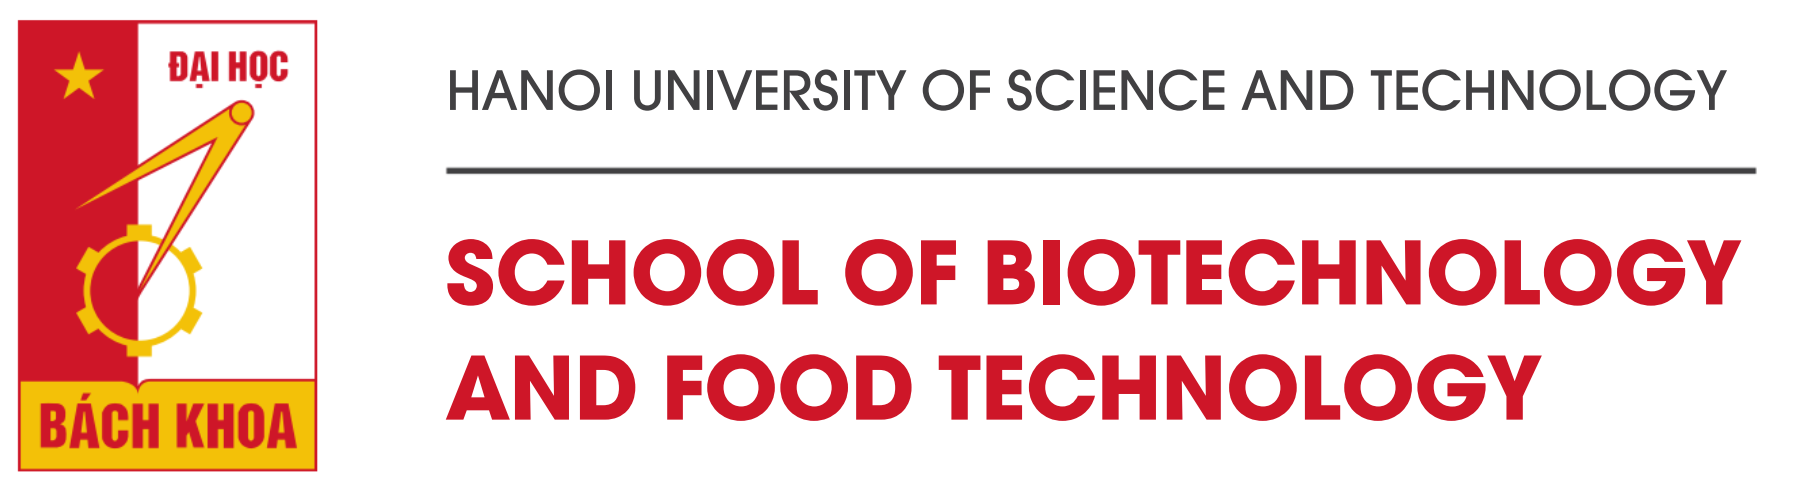 School of Biotechnology and Food Technology